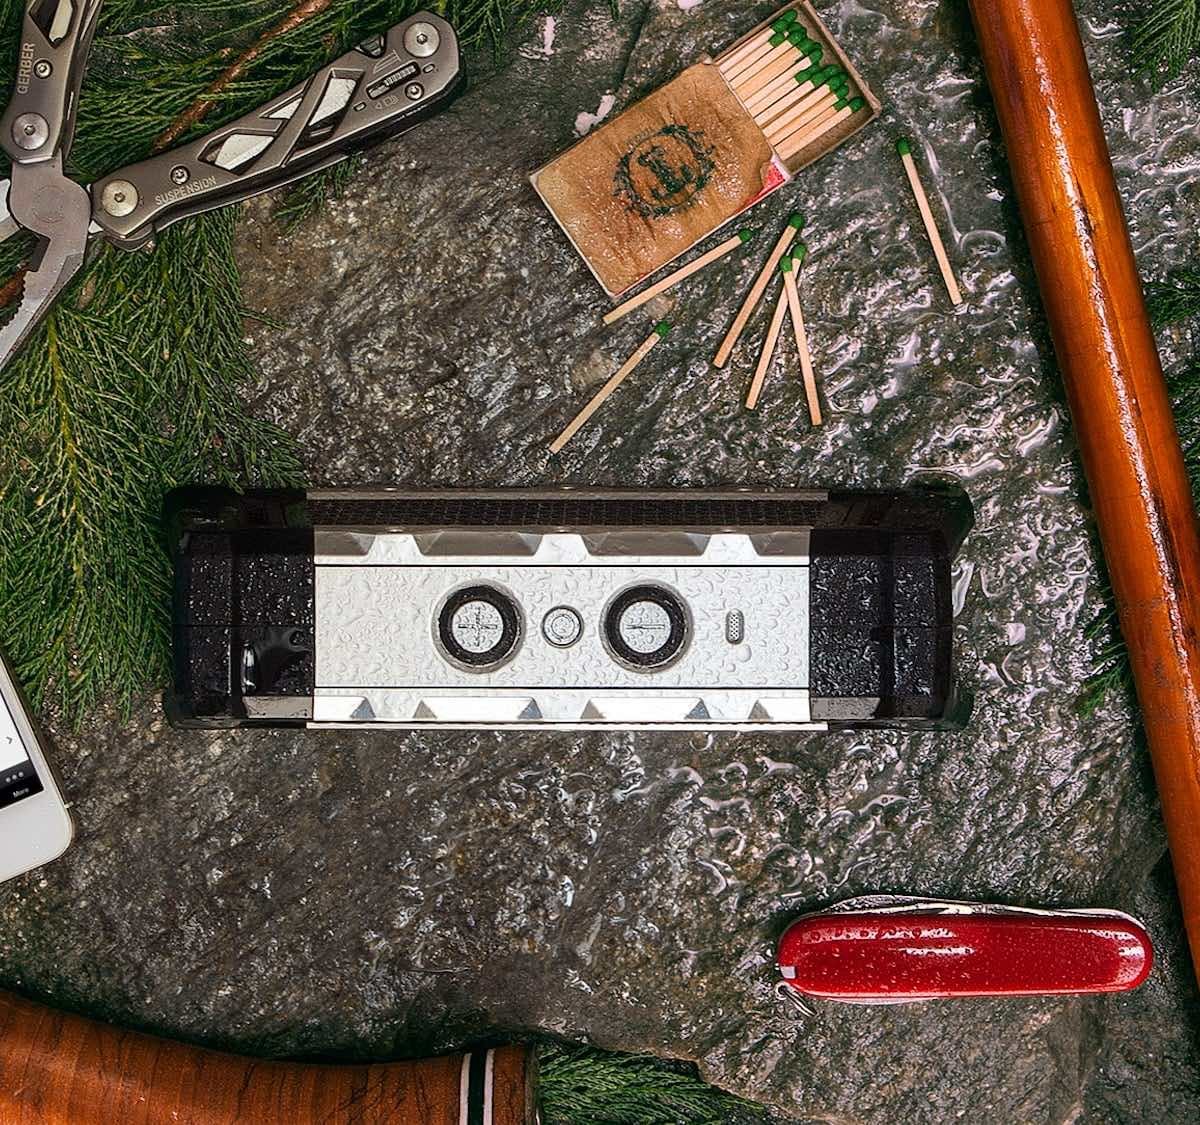 Fugoo Tough 2.0 rugged waterproof speaker is built to withstand extreme conditions